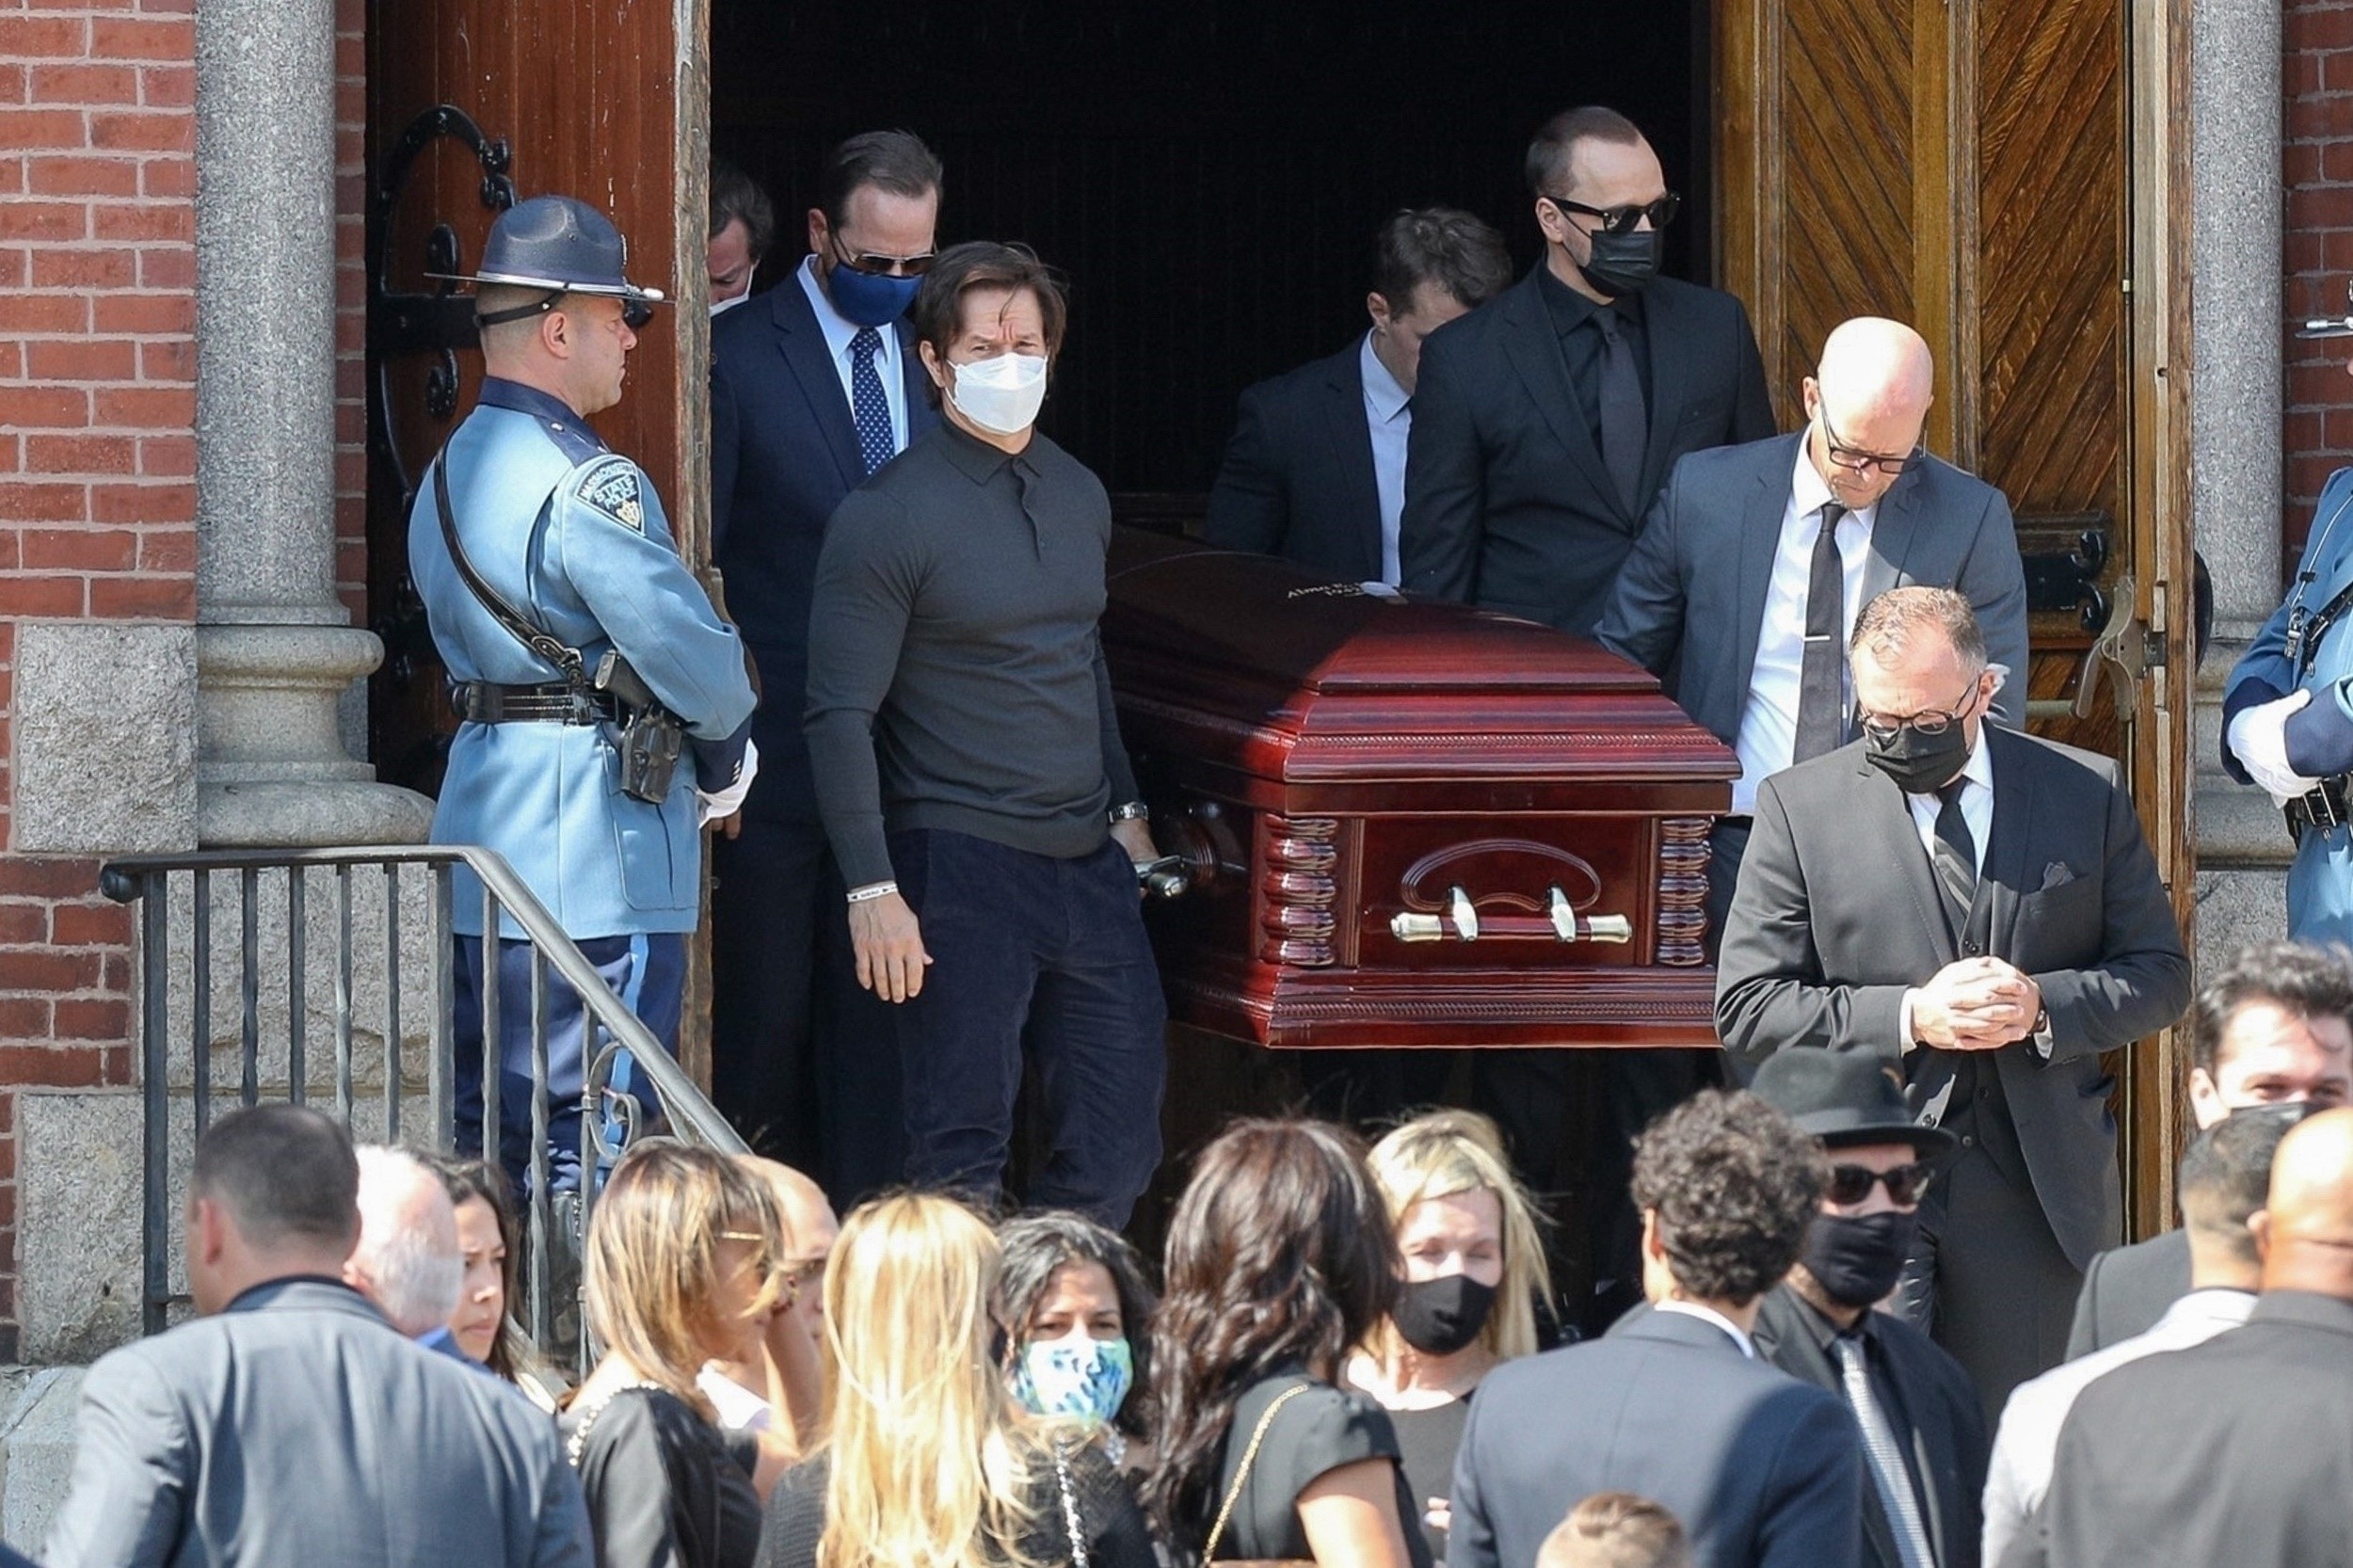 Photo © 2021 Backgrid/The Grosby Group*PEXCLUSIVE* Dorchester, MA  Mark and Donnie Wahlberg carry their mother, Alma Wahlberg's casket  during her funeral church service. Rhea Durham was spotted leaving the church with Mark. Donnie's wife, Jenny McCar (Foto: Backgrid/The Grosby Group)